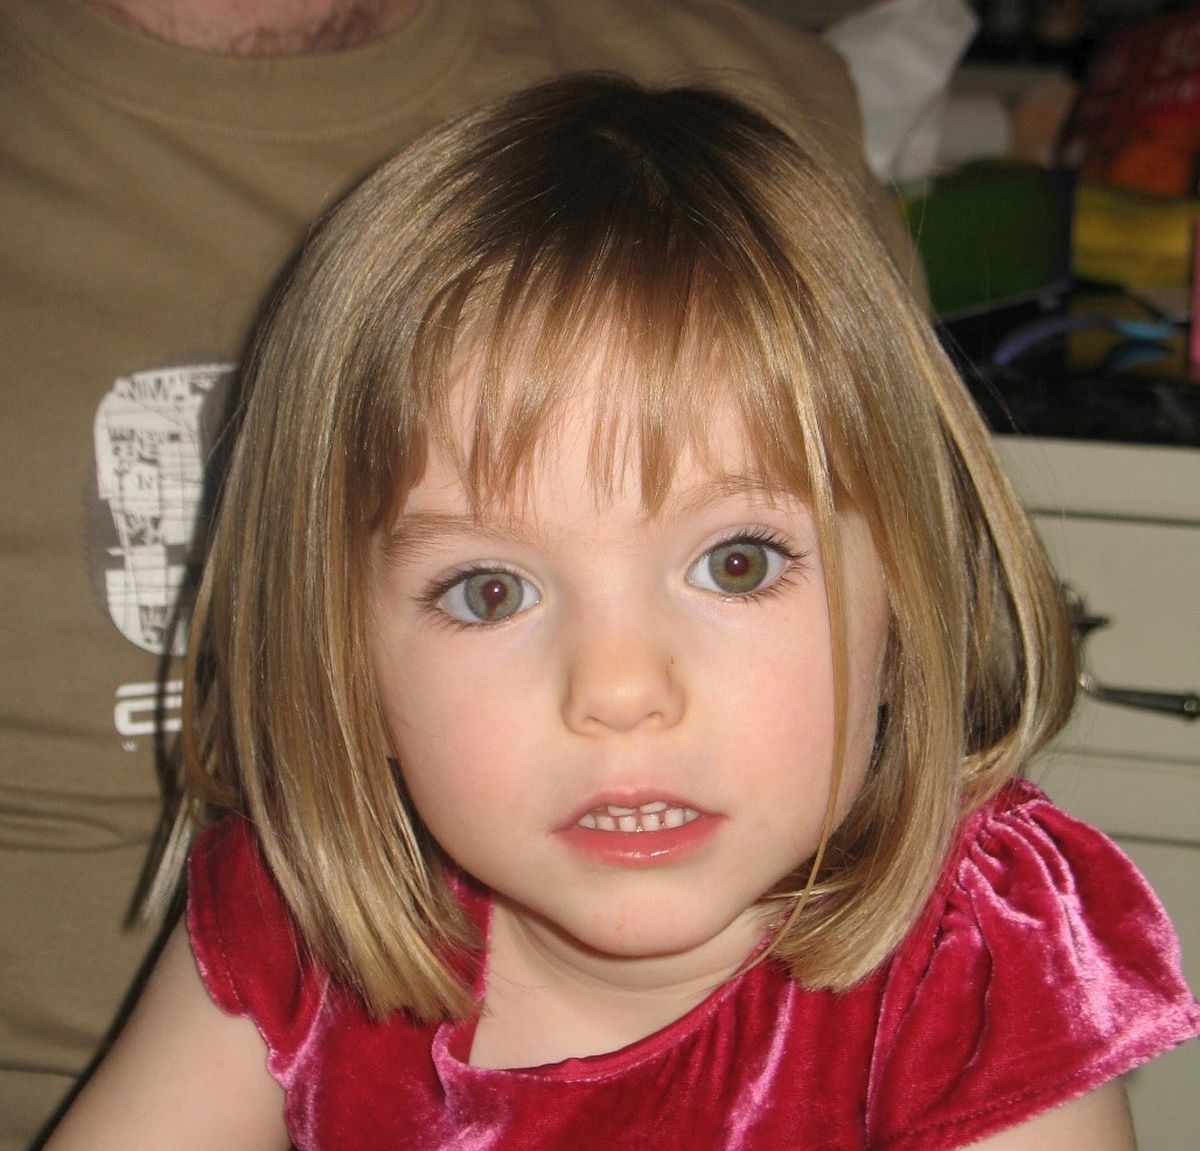 epa08463419 An undated handout photo made available by the Metropolitan Police of Madeleine McCann, issued 03 June 2020. According to reports on 03 June 2020, a 43-year old German prisoner is identified as suspect in the disappearance of Madeleine McCann. The English child disappeared 03 May 2007, from a room where she slept with two twin brothers, in an apartment of a resort in Praia da Luz in the Algarve.  EPA/METROPOLITAN POLICE HANDOUT  HANDOUT EDITORIAL USE ONLY/NO SALES